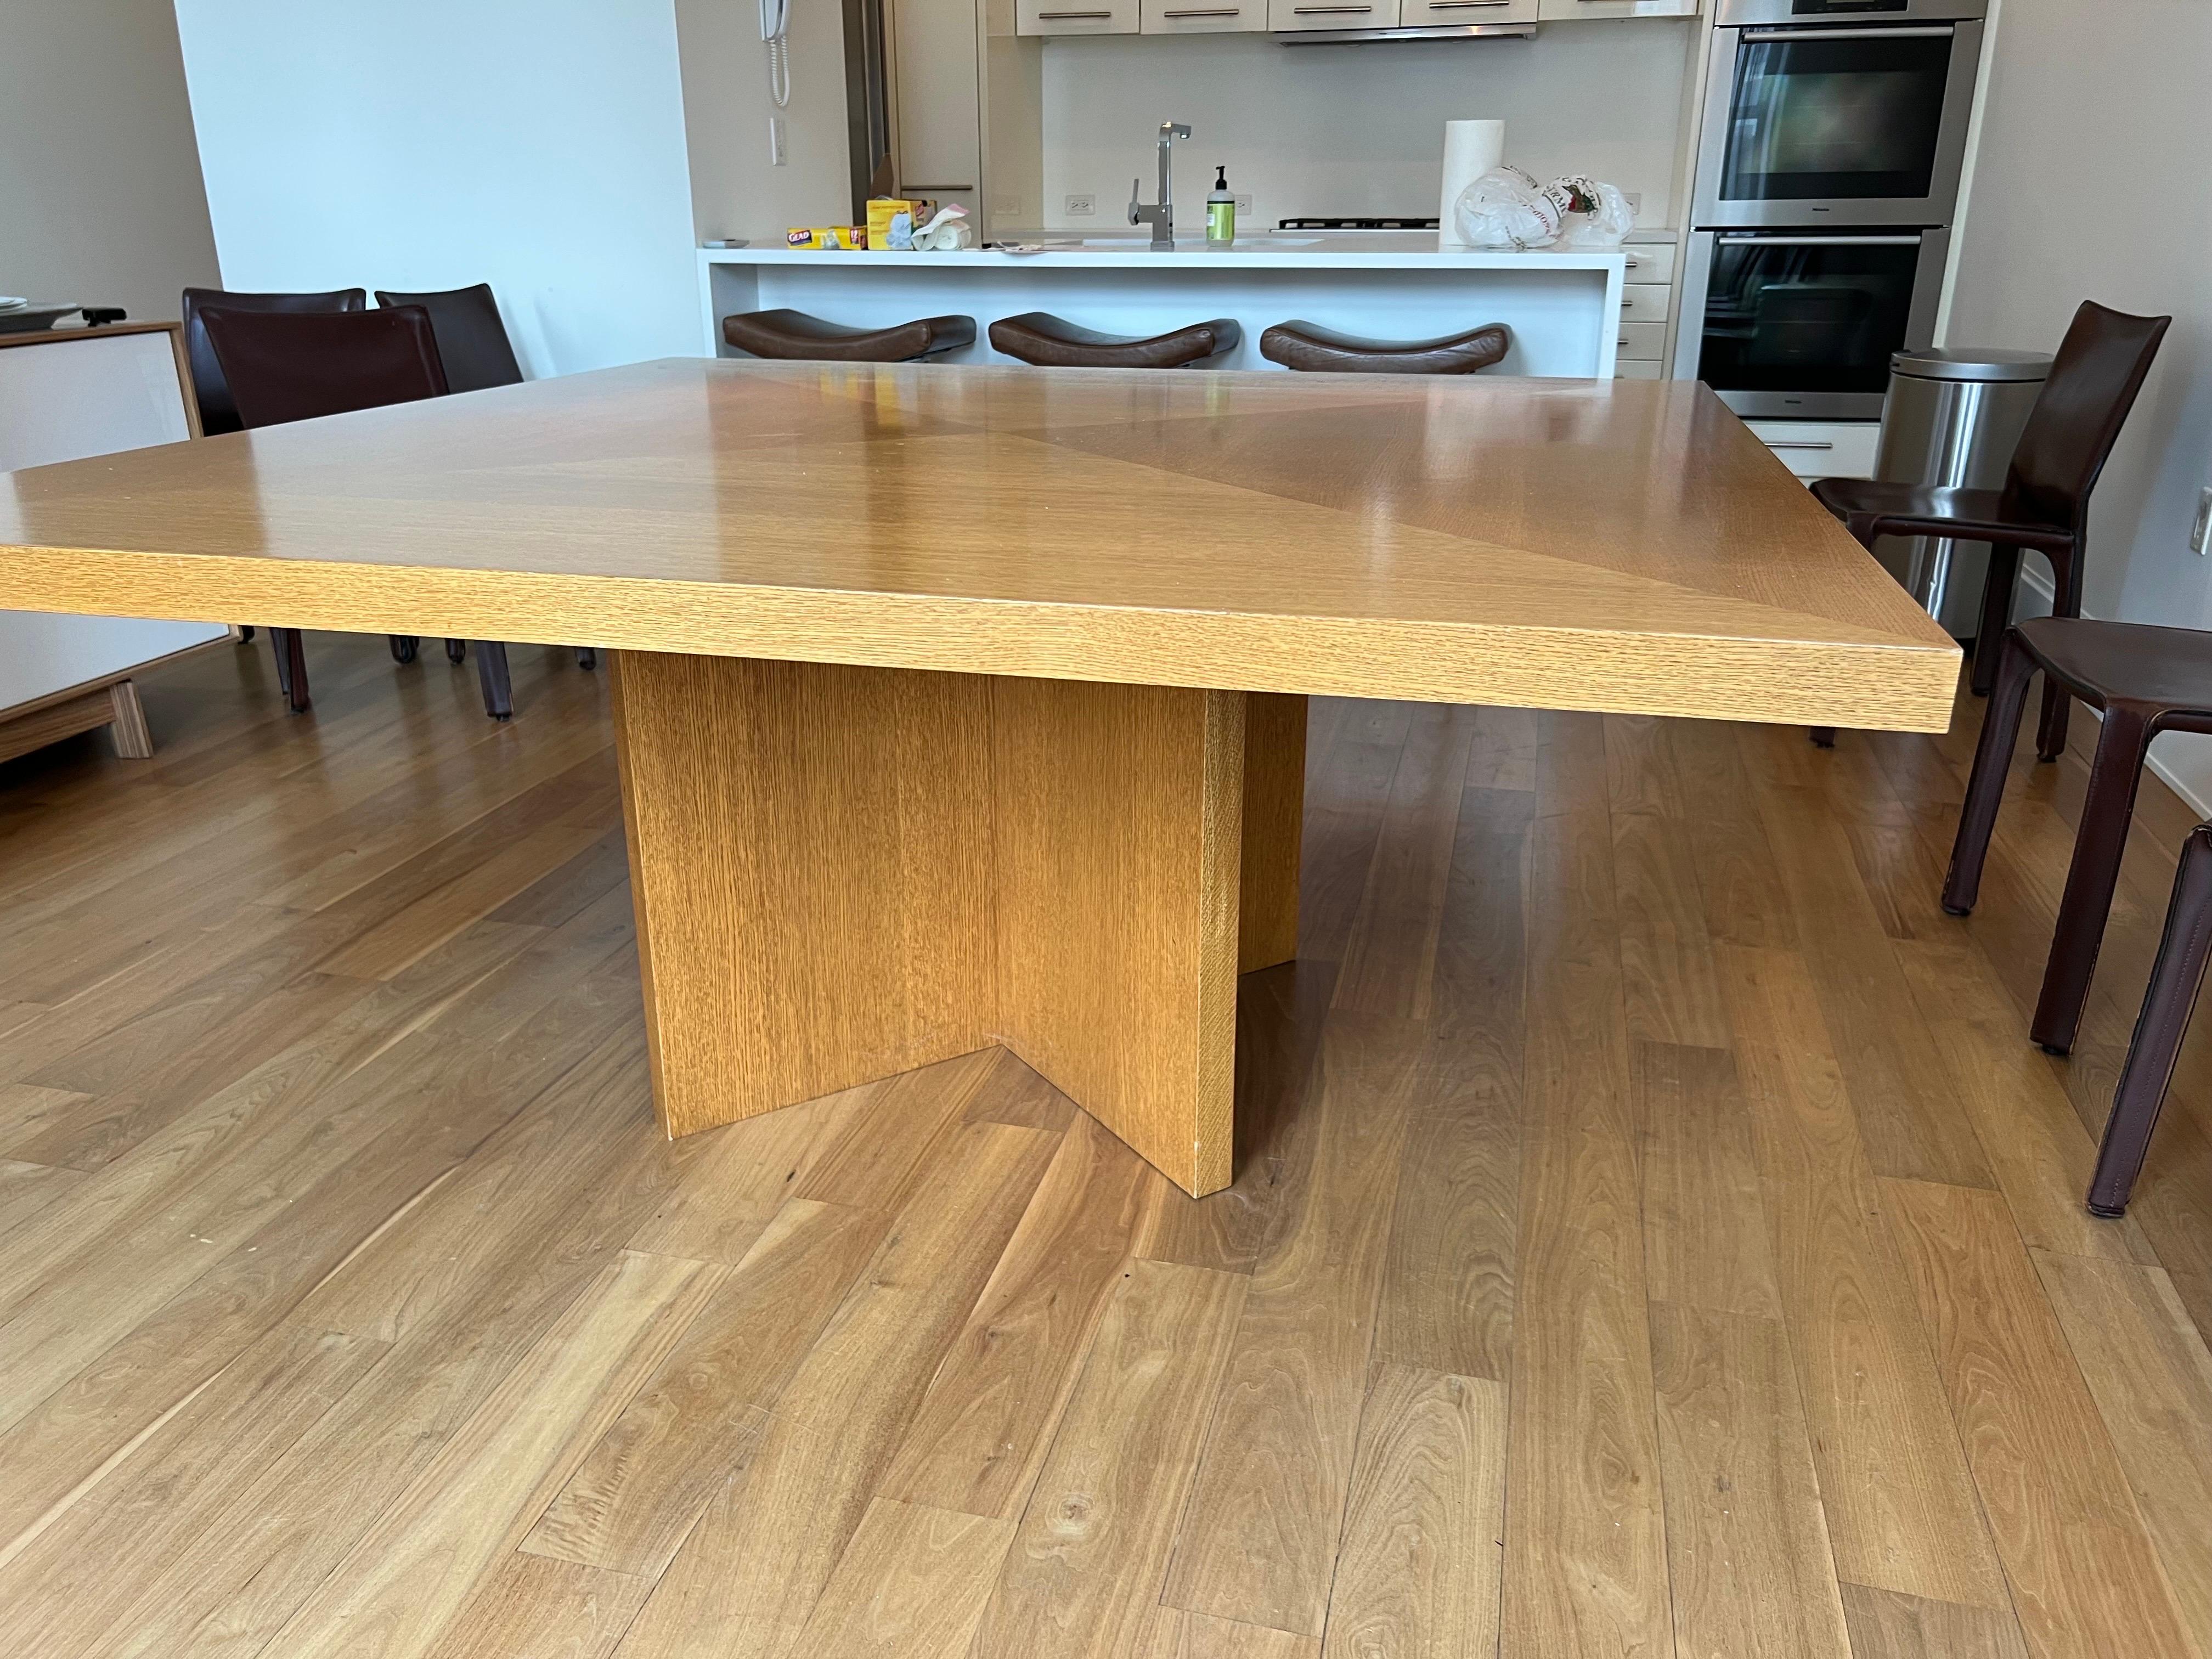 21st Century Large Custom Square Oak Dining Table
A large light honey finish oak square table. 
Very good condition. General wear to finish from age and use.  Two areas of loss to the center top of table.

65